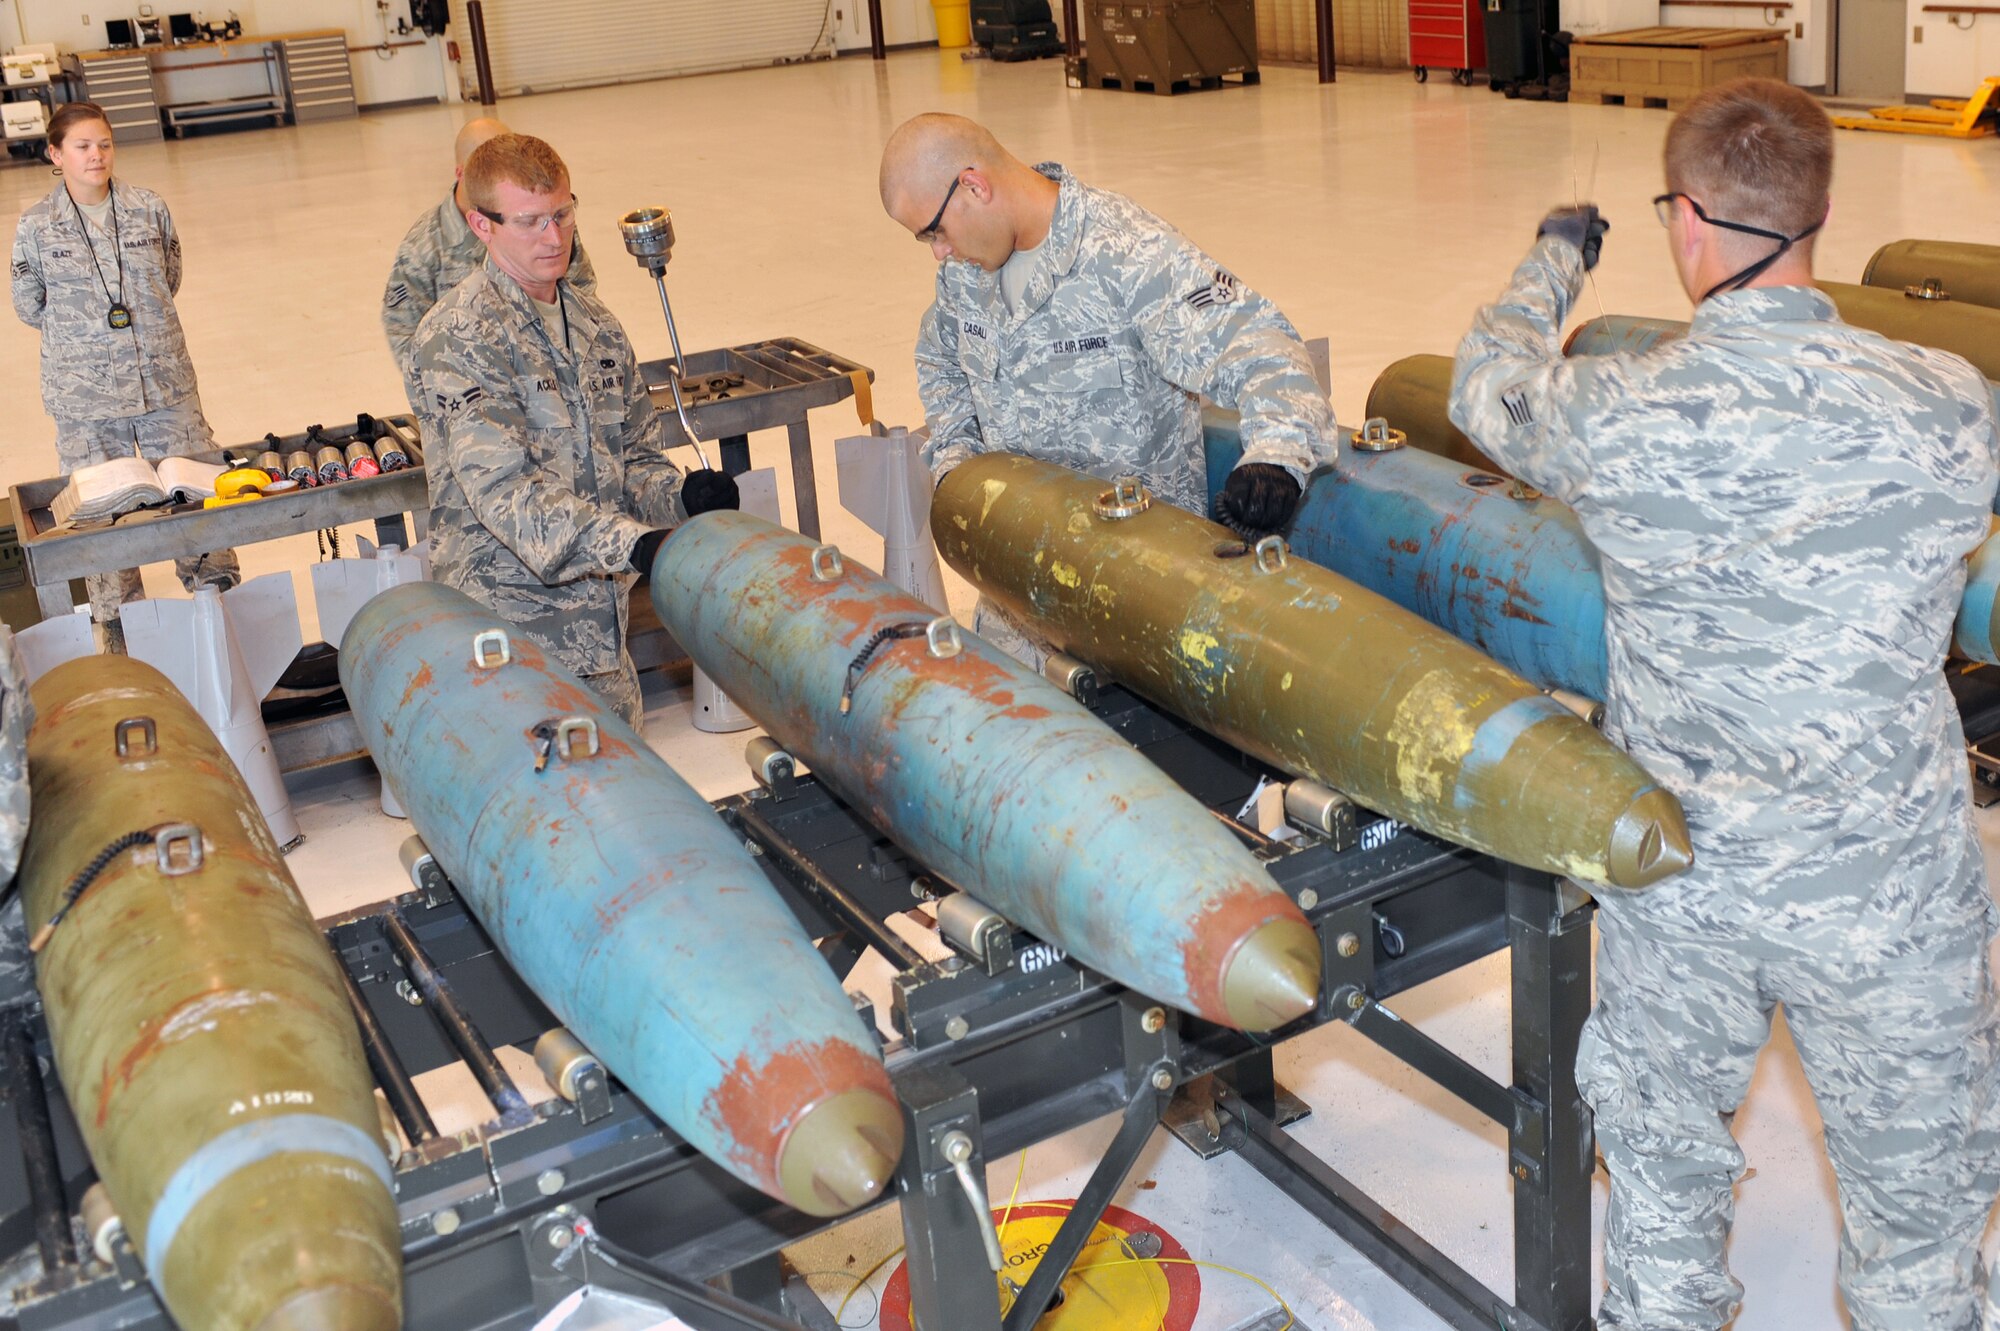 WHITEMAN AFB, Mo. - Airmen from the 509th Munitions Squadron work together to prepare 12 MK-82 bombs during a practice session for the Air Force Global Strike Command Challenge, Jul. 12. The seven-Airmen 509th MUNS team safely prepared all the 500-pound bombs in a short ammount of time.